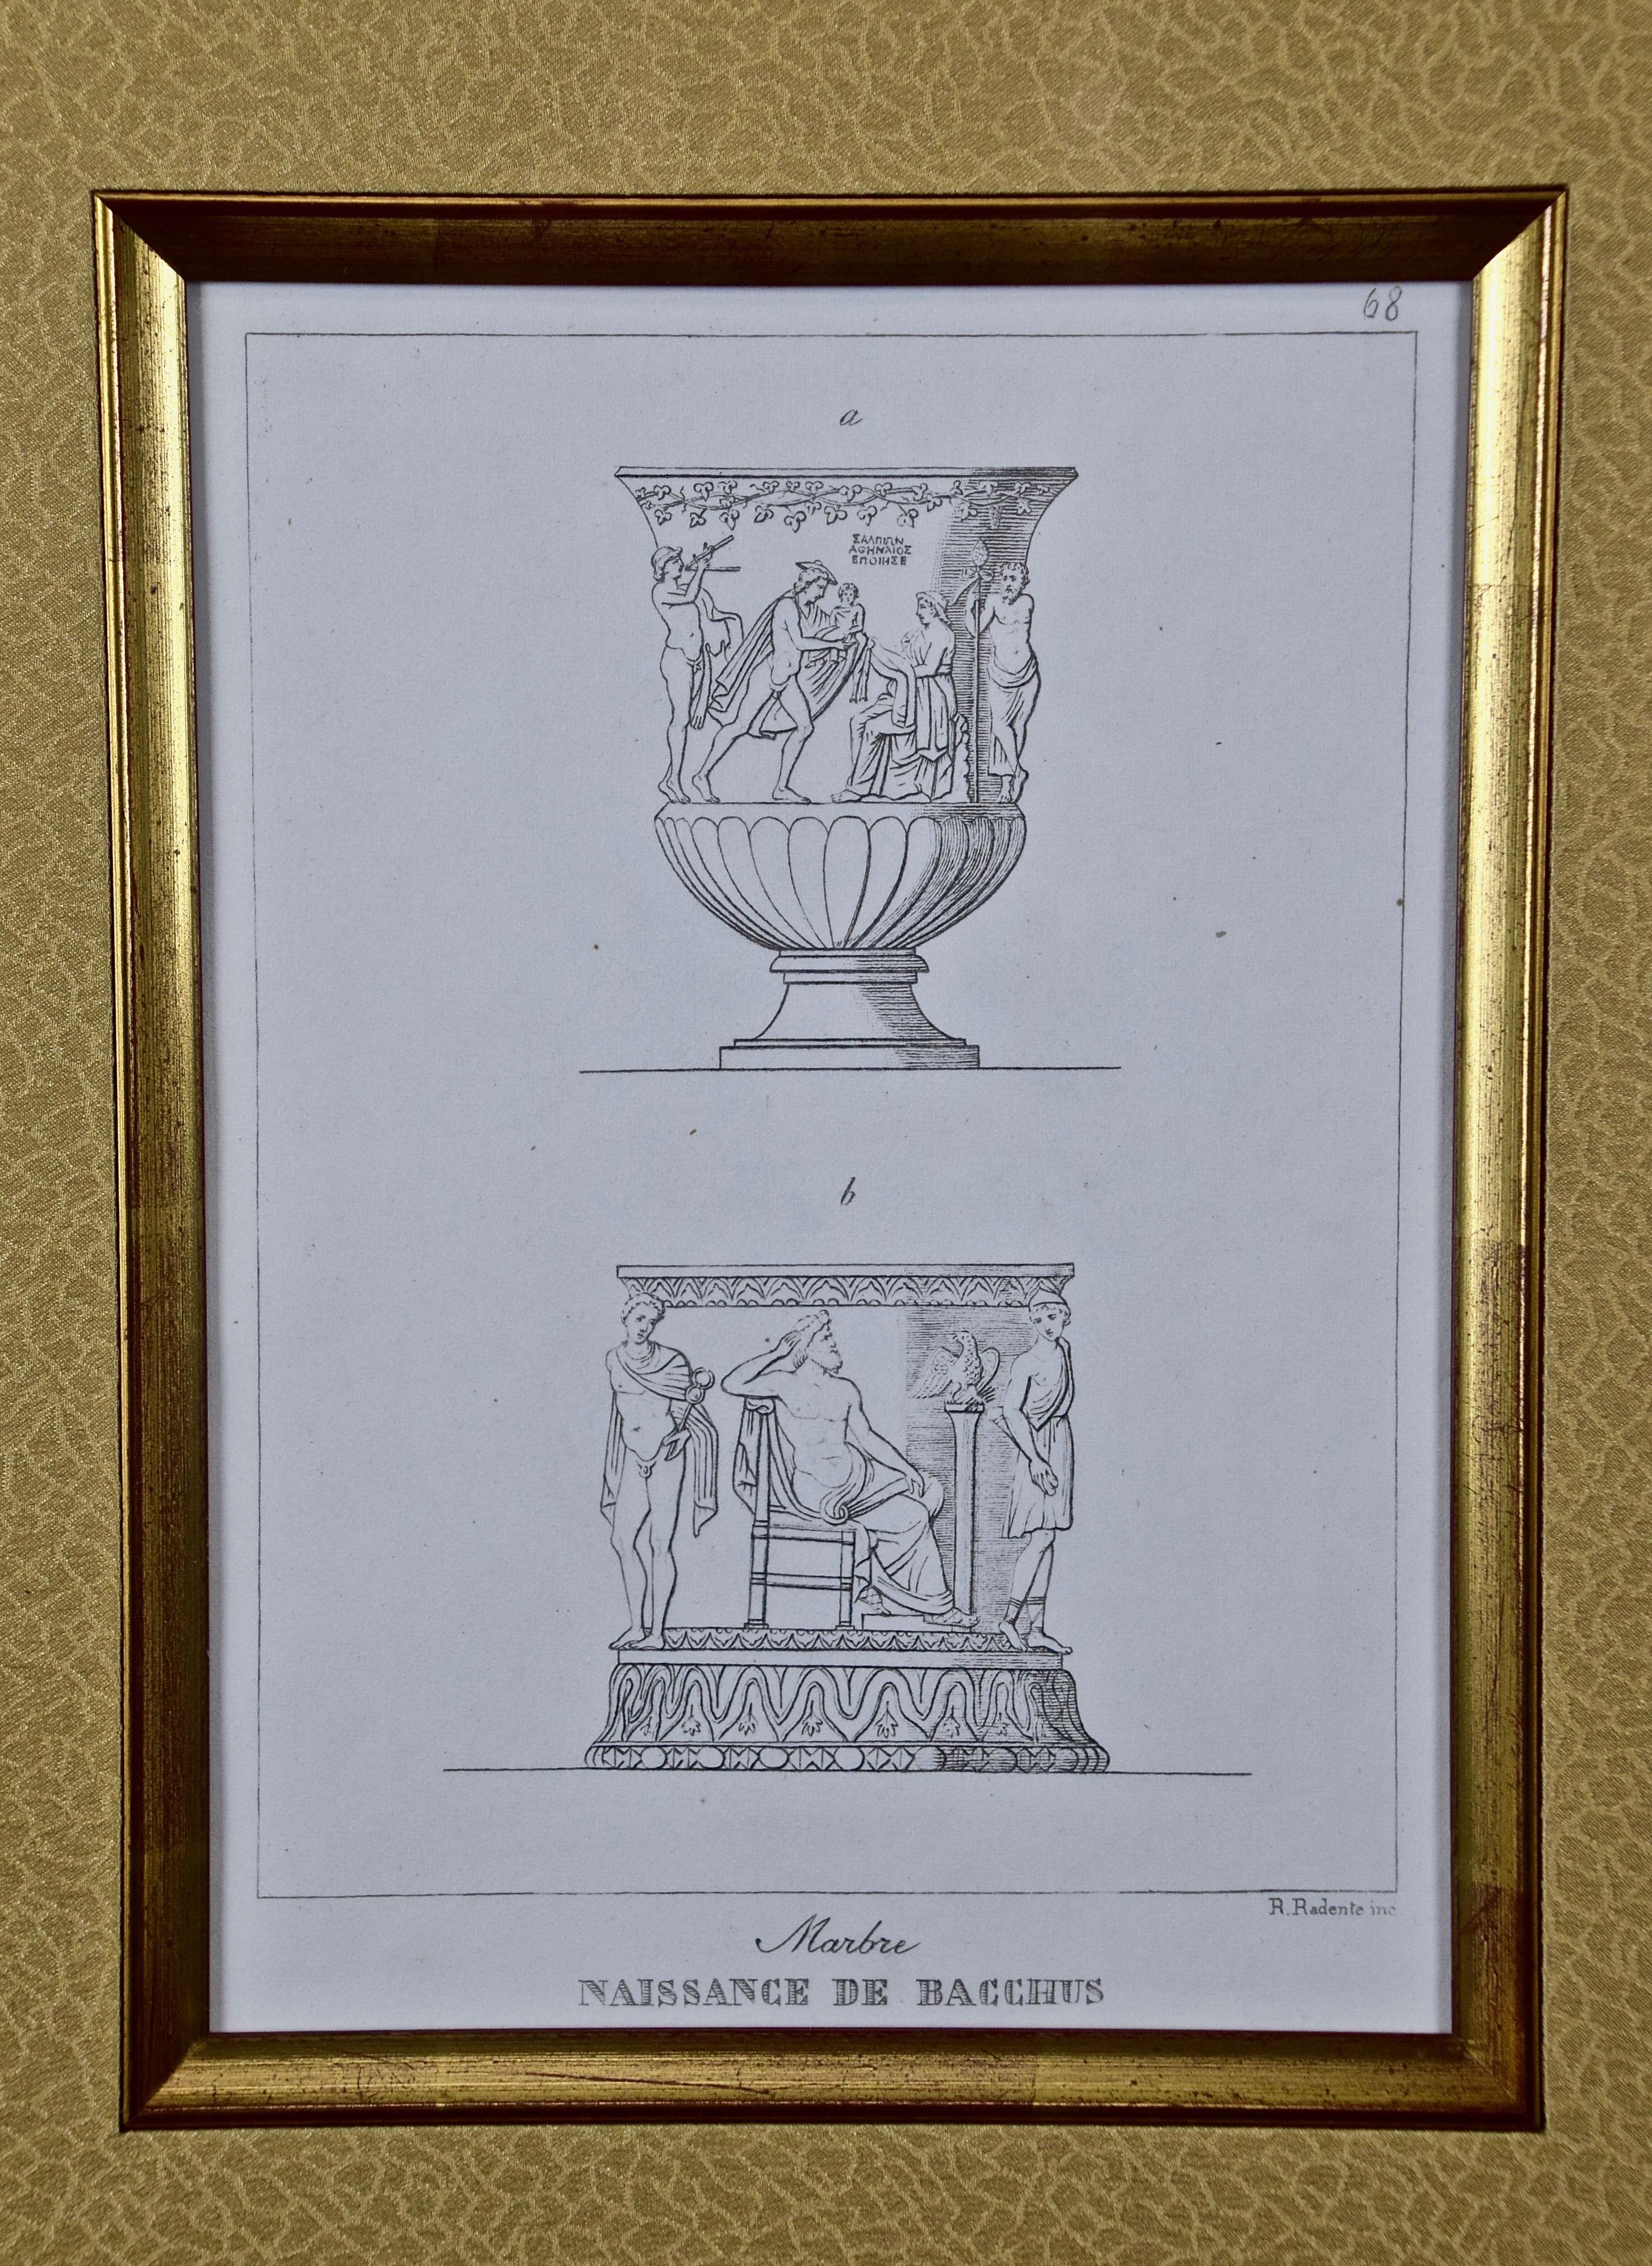 A grouping of three engravings depicting classical Italian architectural features held in the National Museum of Naples, entitled 